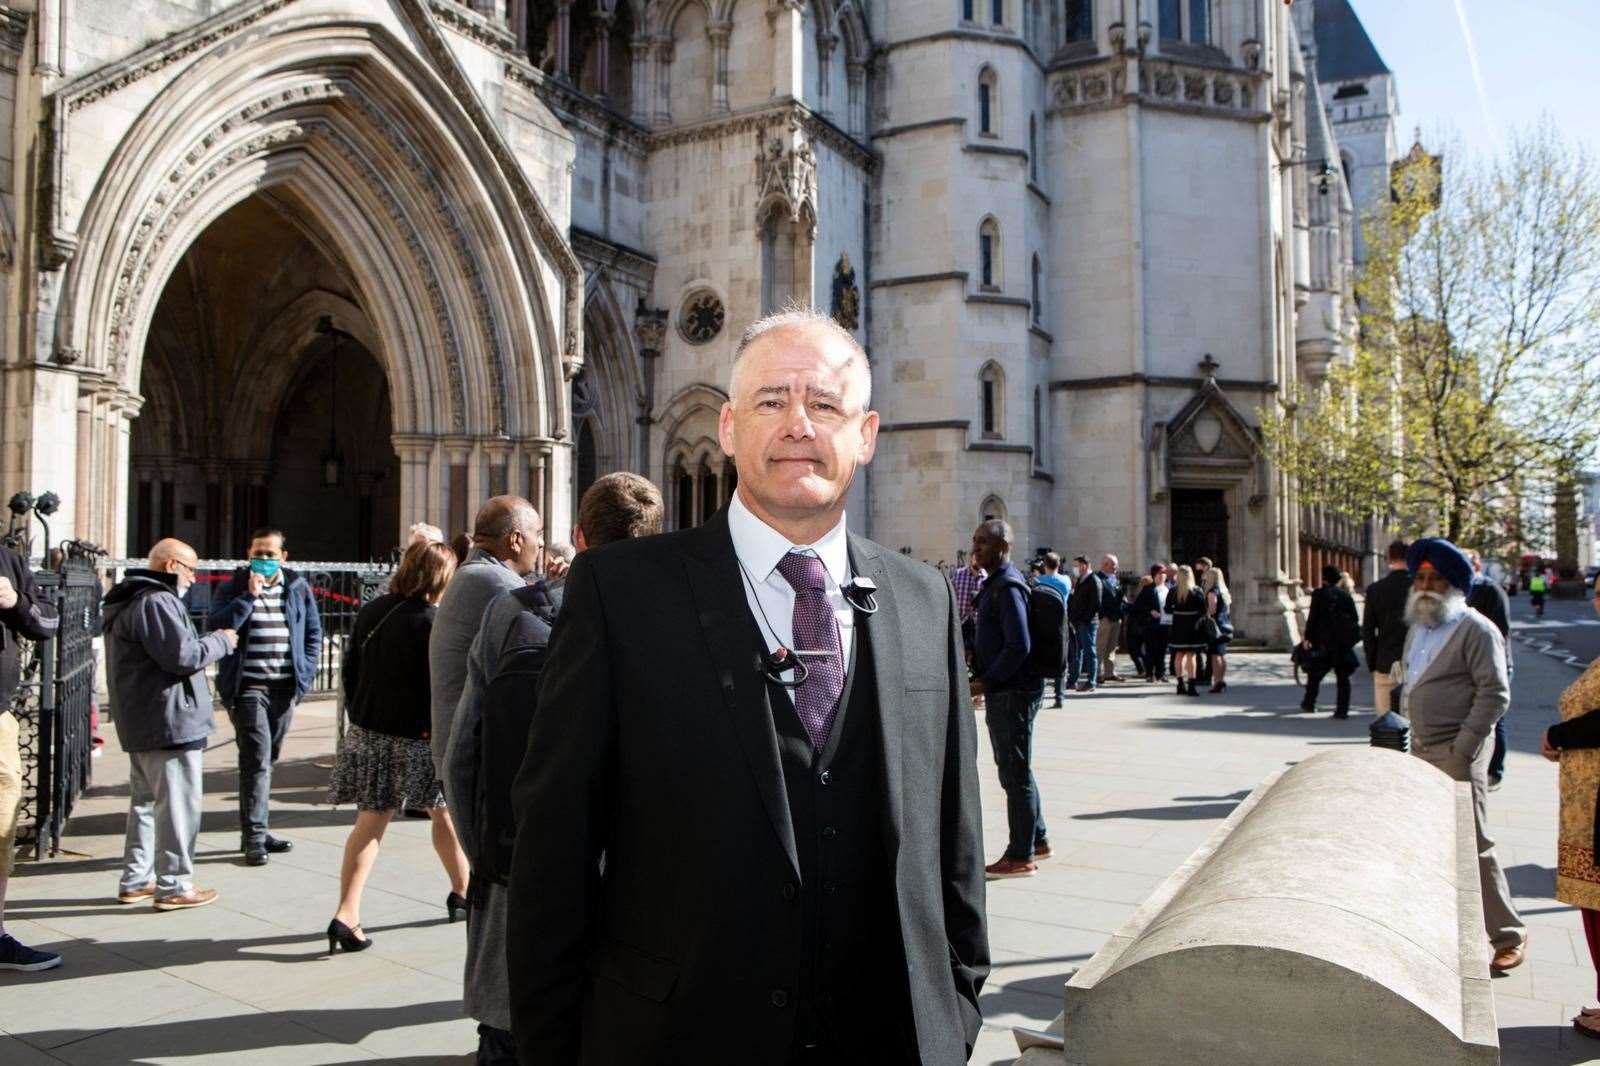 Mr Graham after his conviction was quashed in a High Court decision